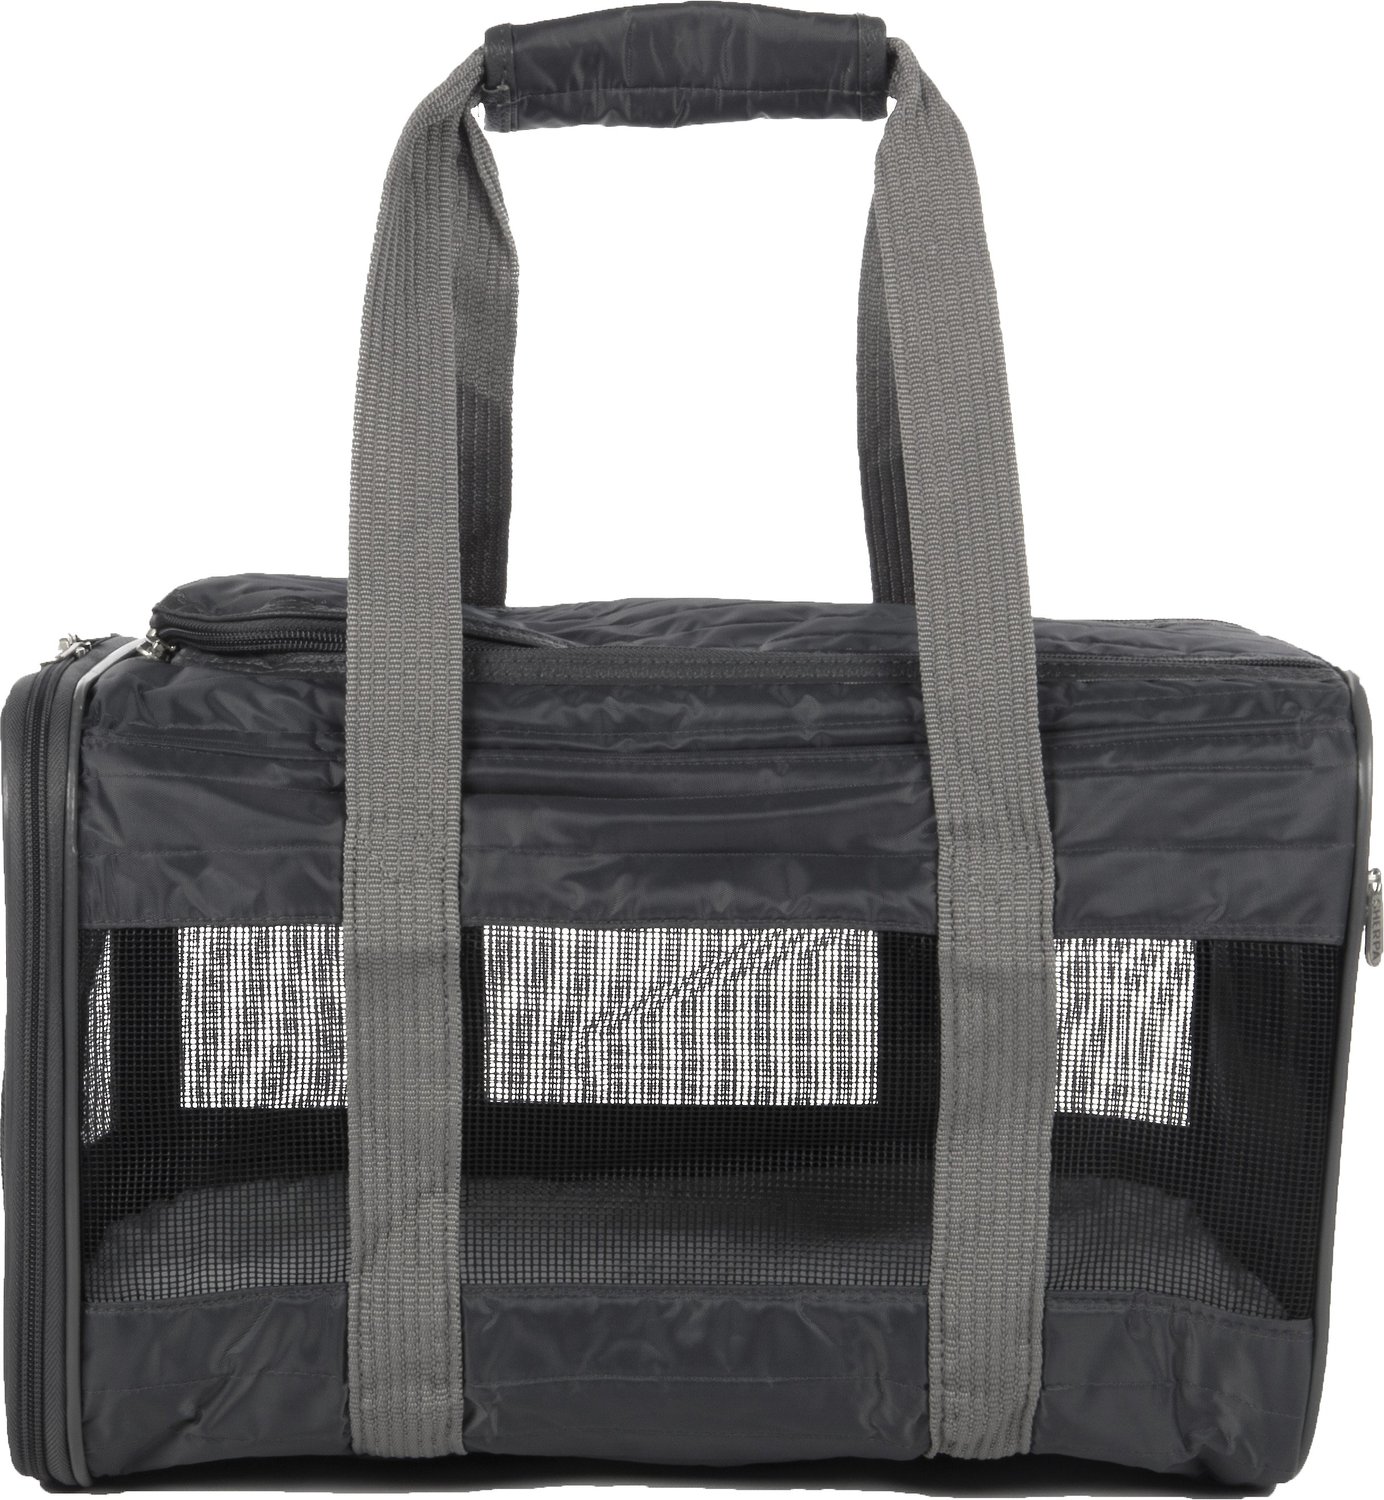 Sherpa Original Deluxe Airline-Approved Dog & Cat Carrier Bag, Charcoal, Medium - 0